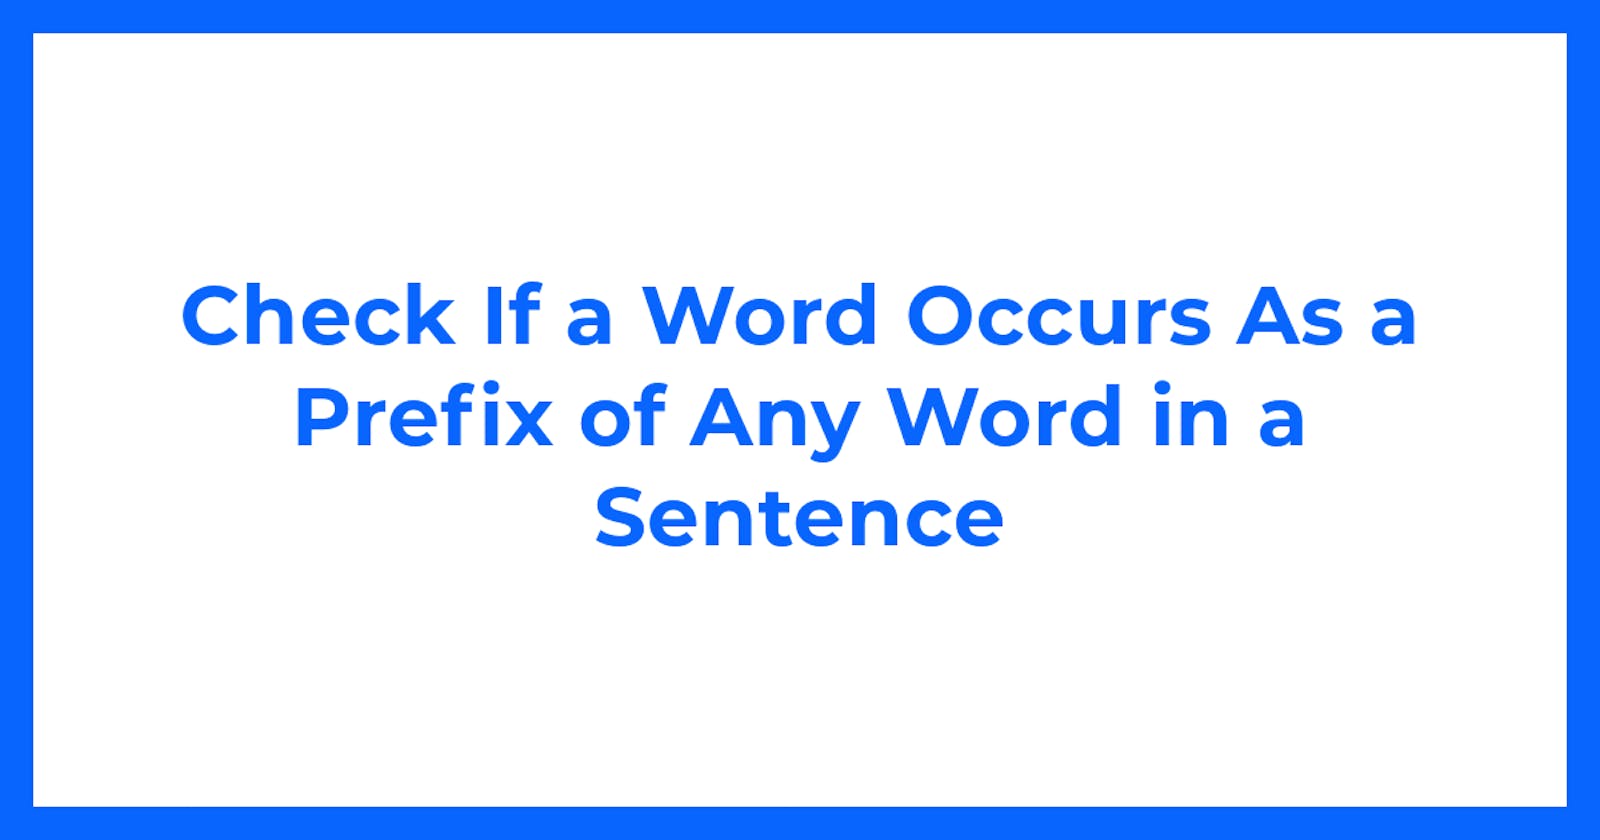 Check If a Word Occurs As a Prefix of Any Word in a Sentence